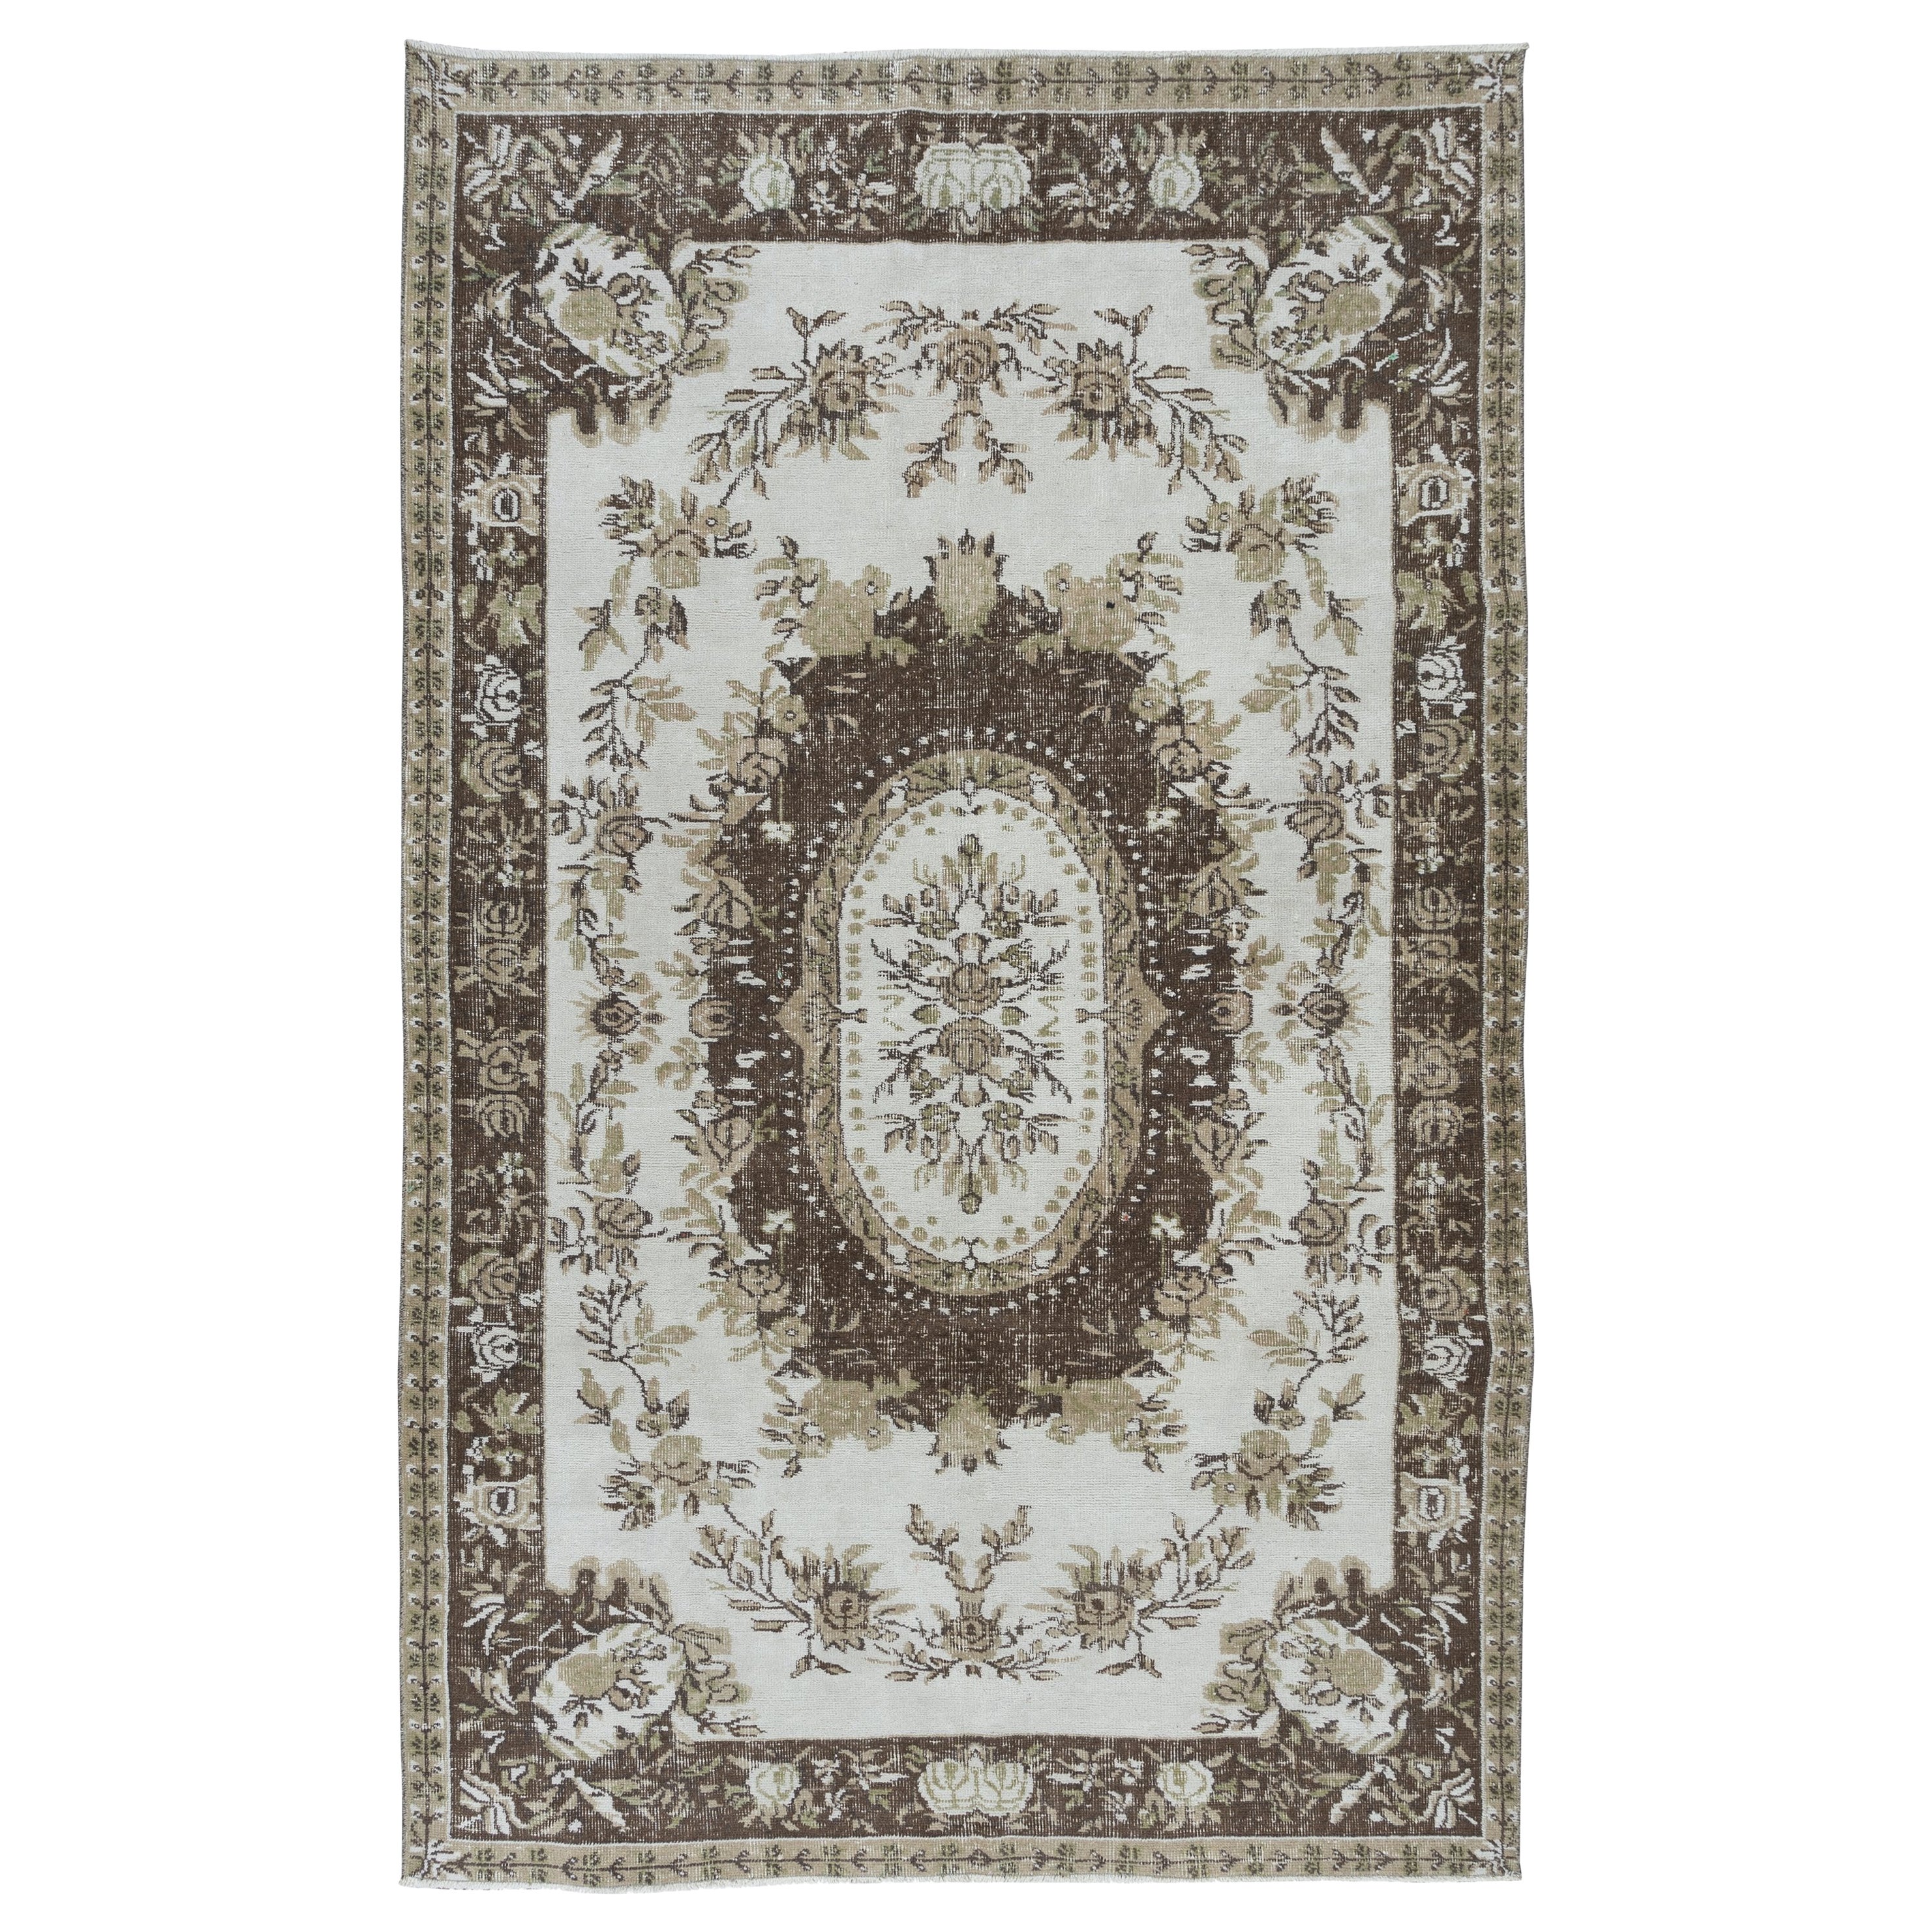 5.4x8.4 Ft Classic Aubusson Inspired Vintage Handmade Faded Rug in Beige & Brown For Sale